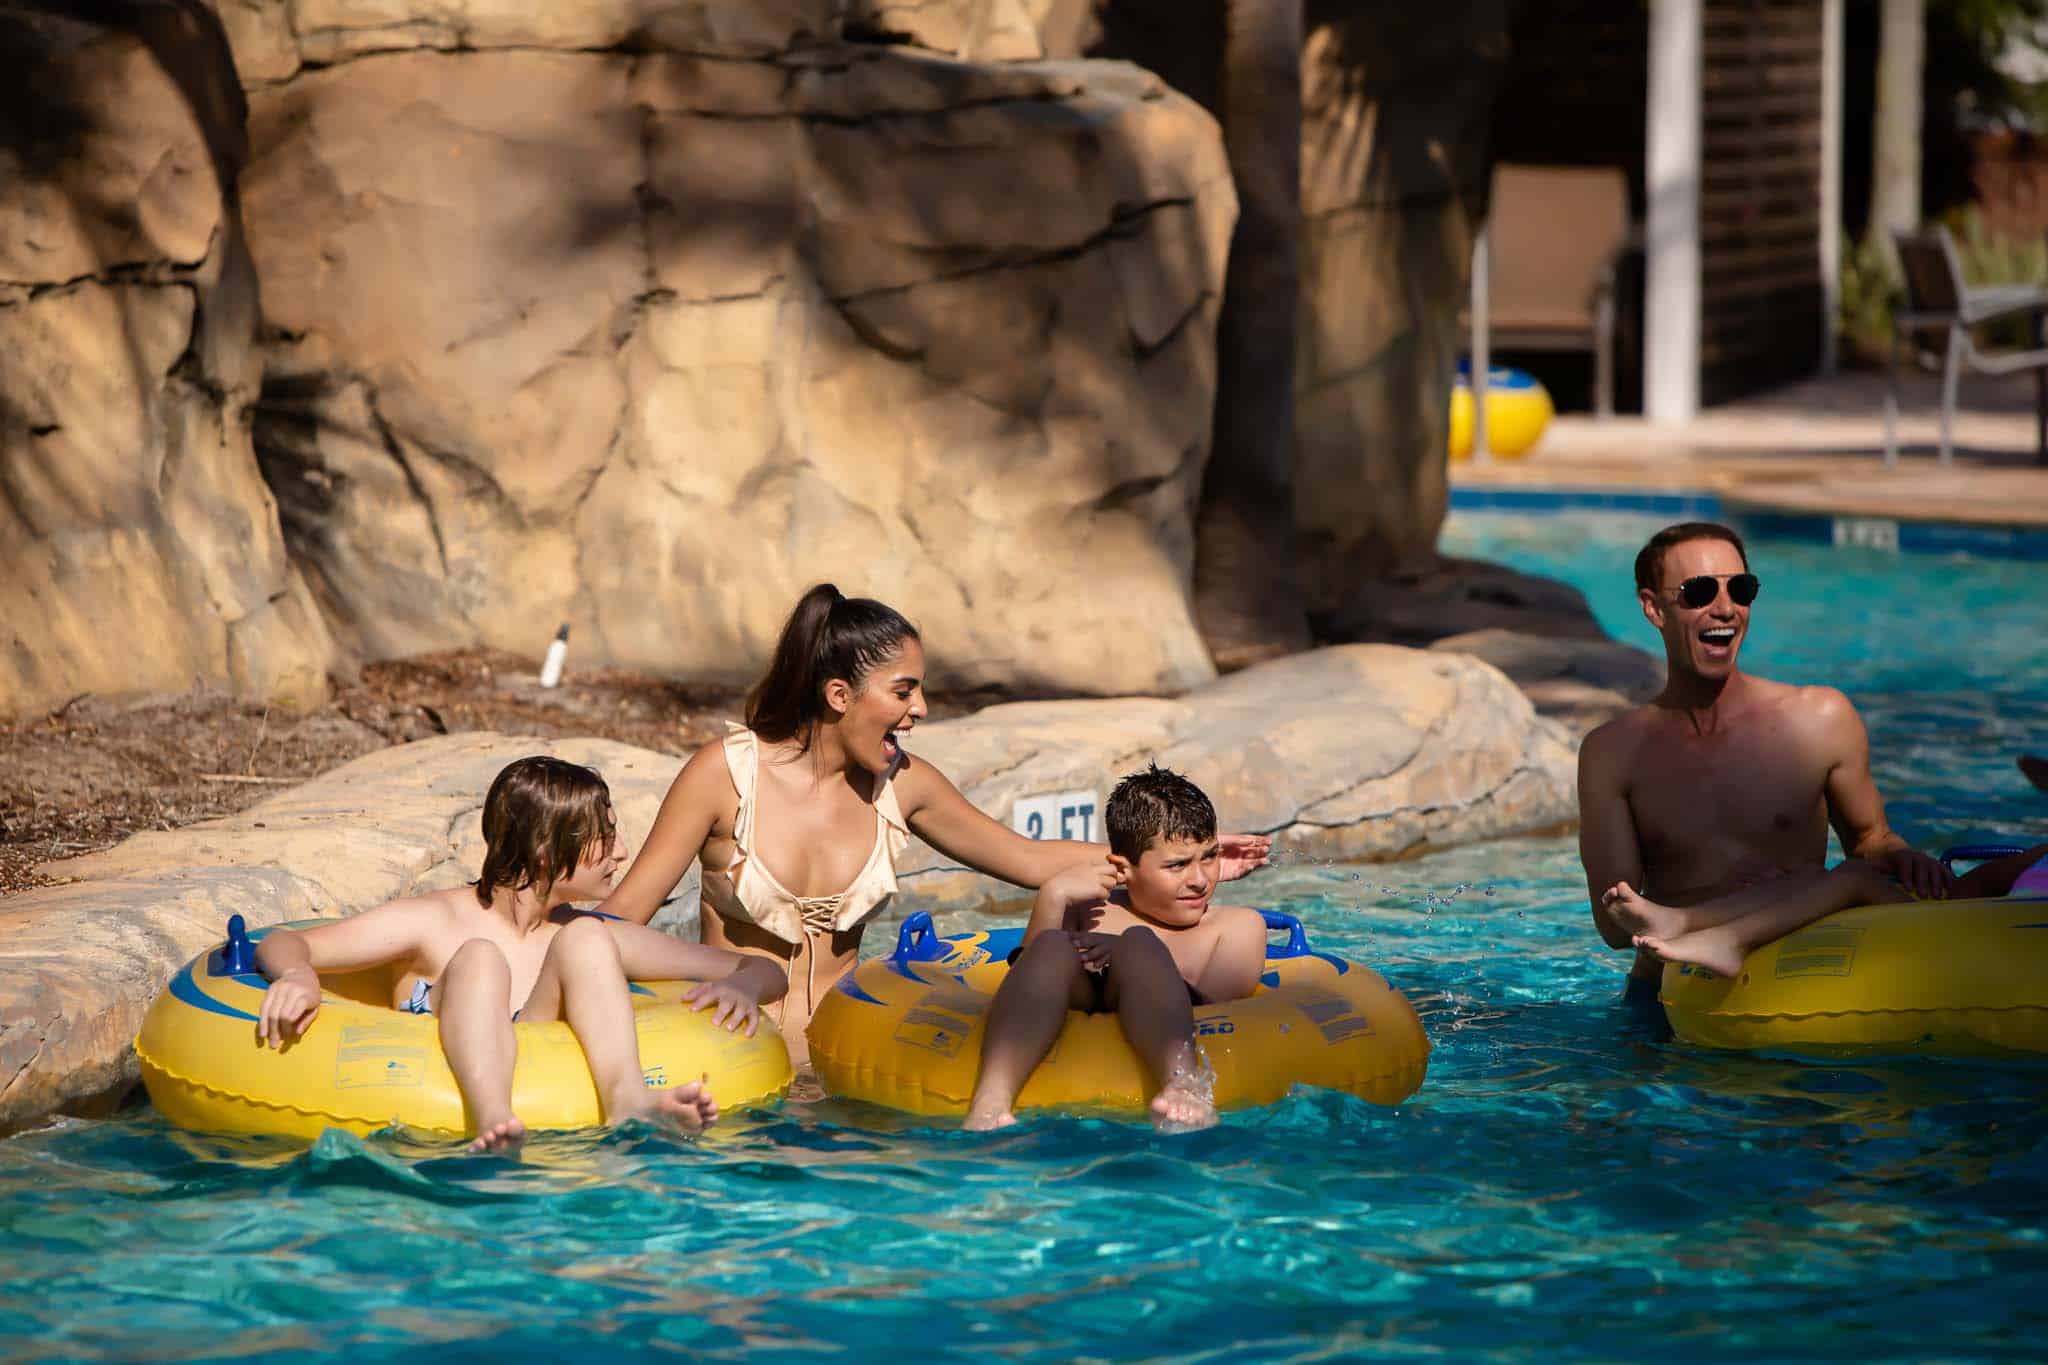 Happy mom and dad push their kids riding in tube floats in the lazy river at The Bear’s Den Resort Orlando’s water park.